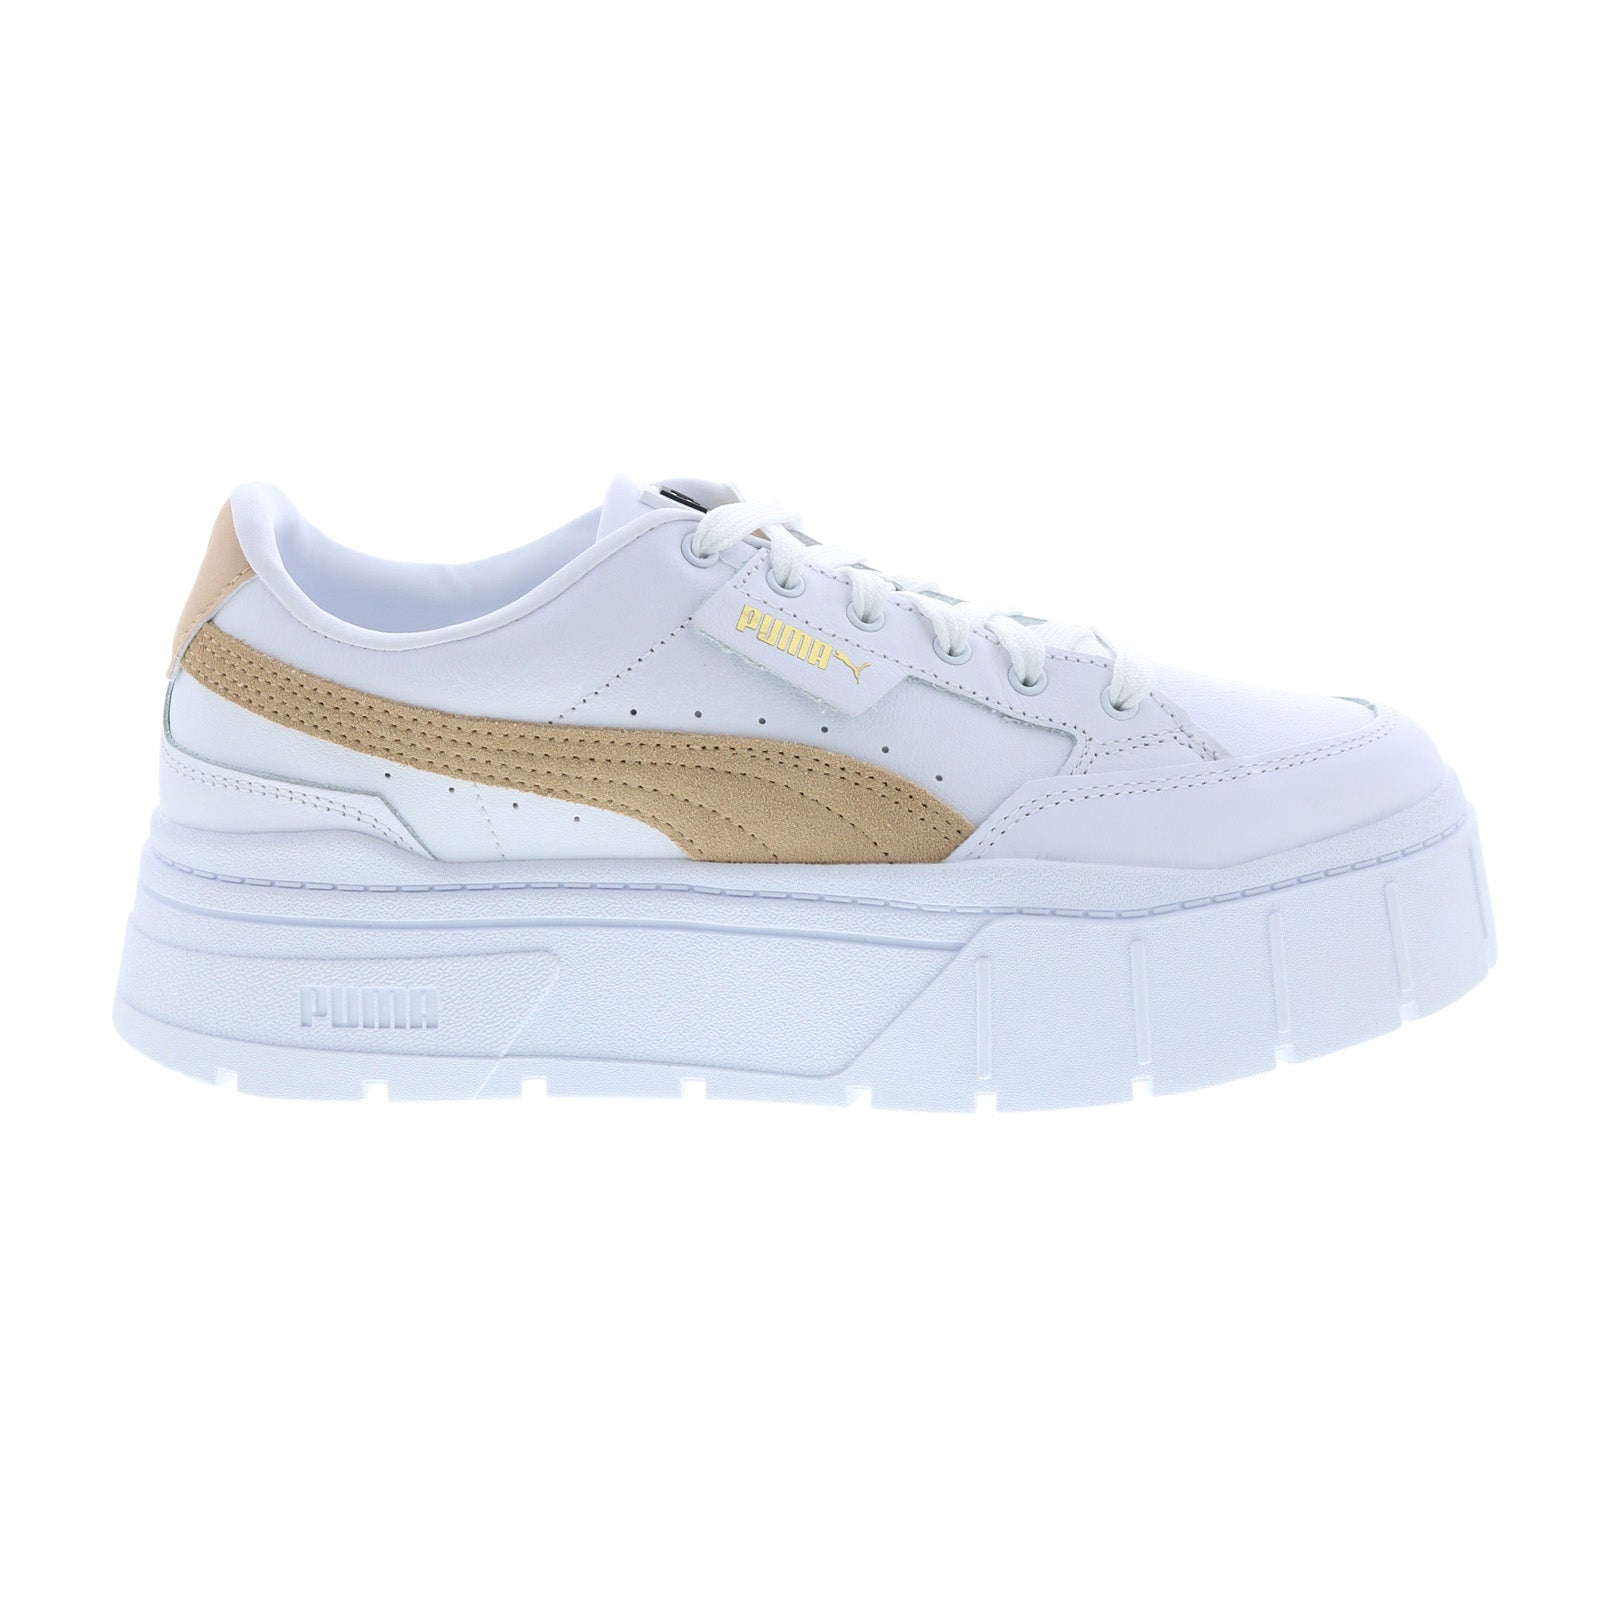 Clip vlinder impliceren adviseren Puma Mayze Stack 38436303 Womens White Leather Lifestyle Sneakers Shoe -  Ruze Shoes